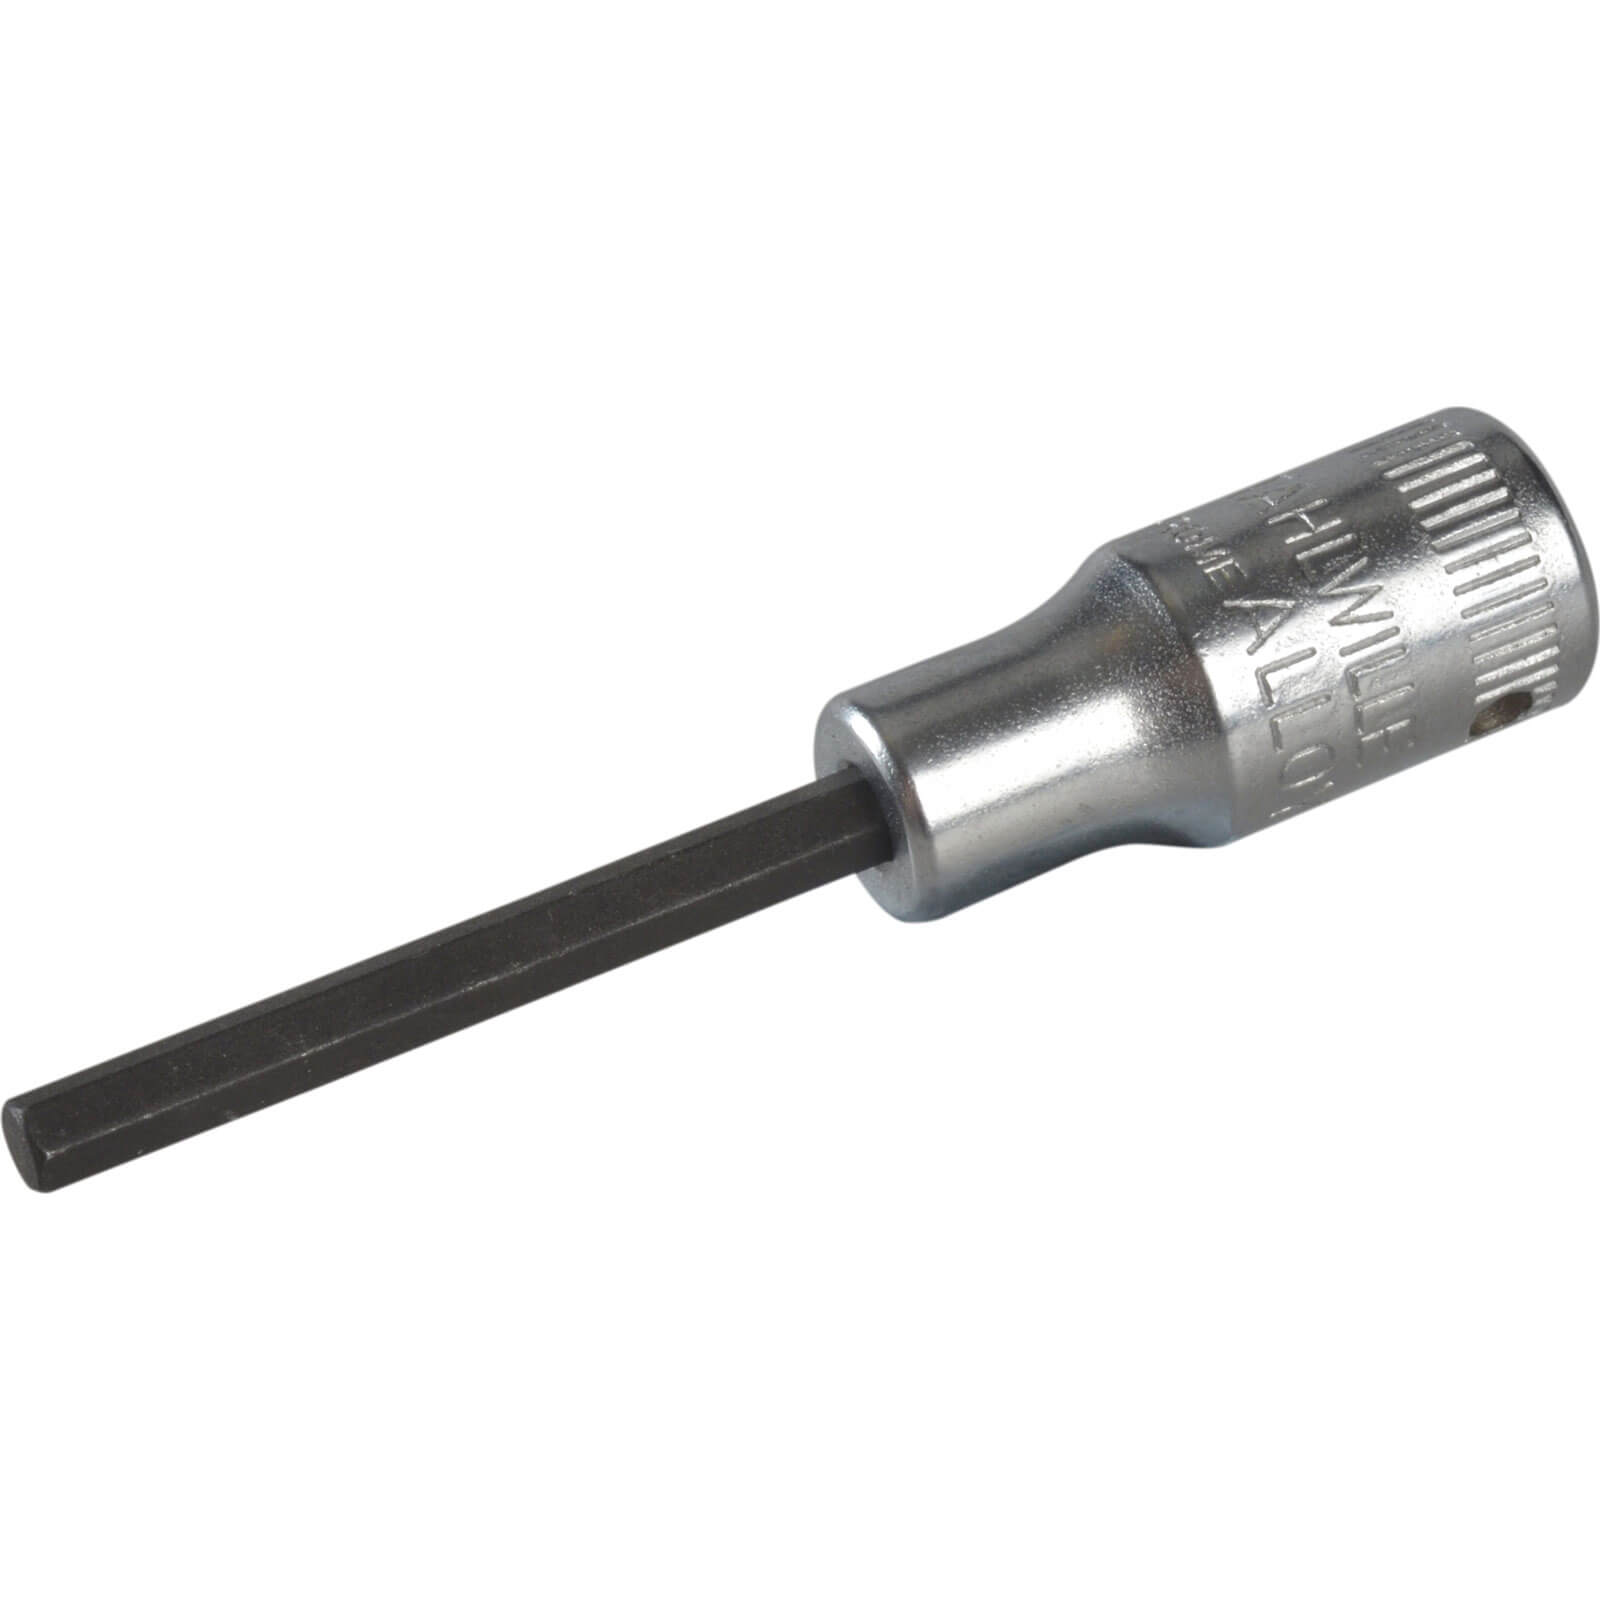 Image of Stahlwille 1/4" Drive Hexagon Socket Bit Imperial 1/4" 7/32"